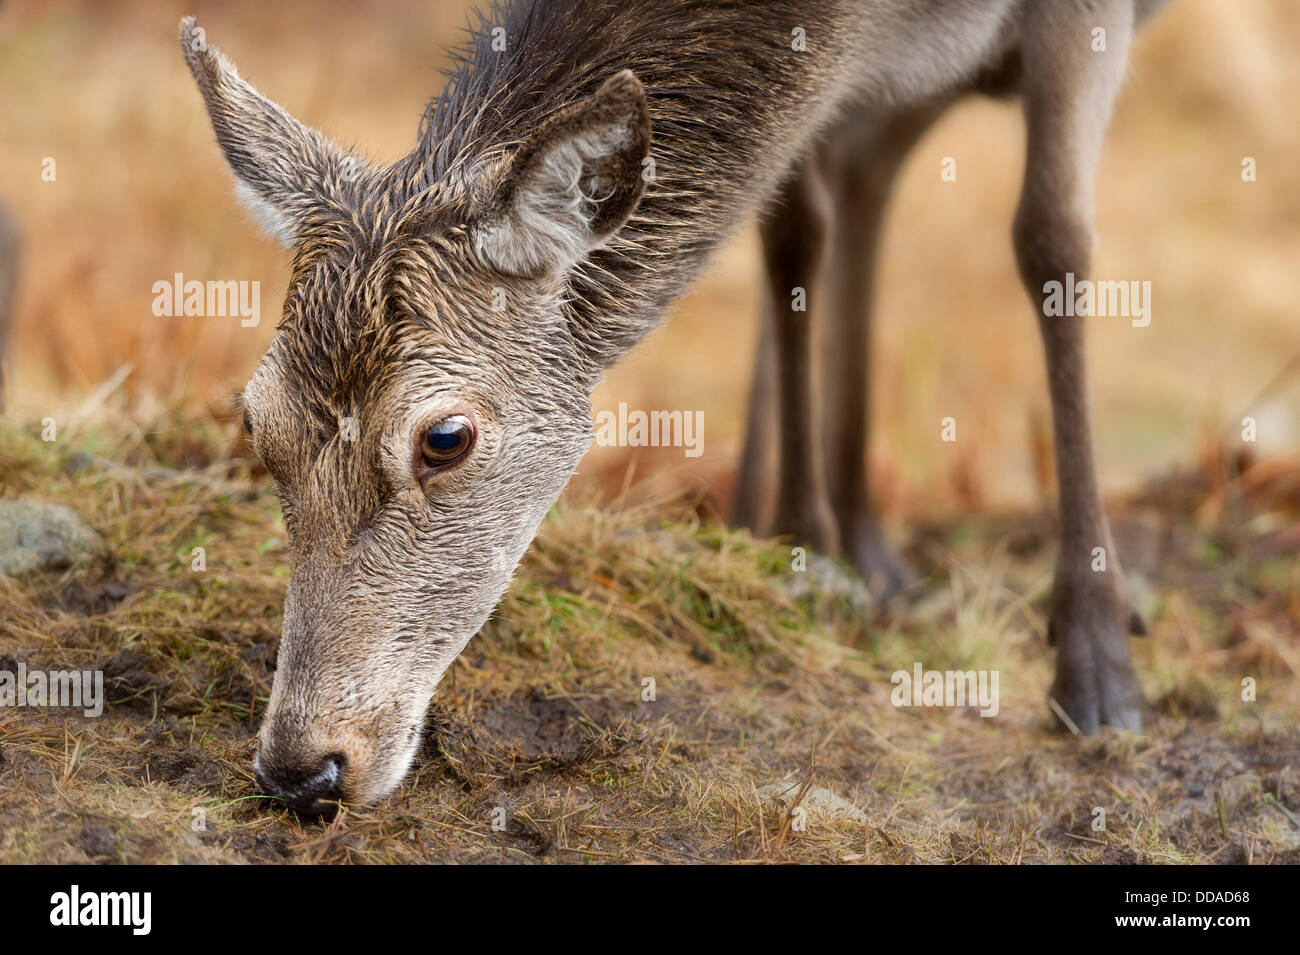 a young wild red stag come close as the ghillies put out food to help them through winter. Stock Photo